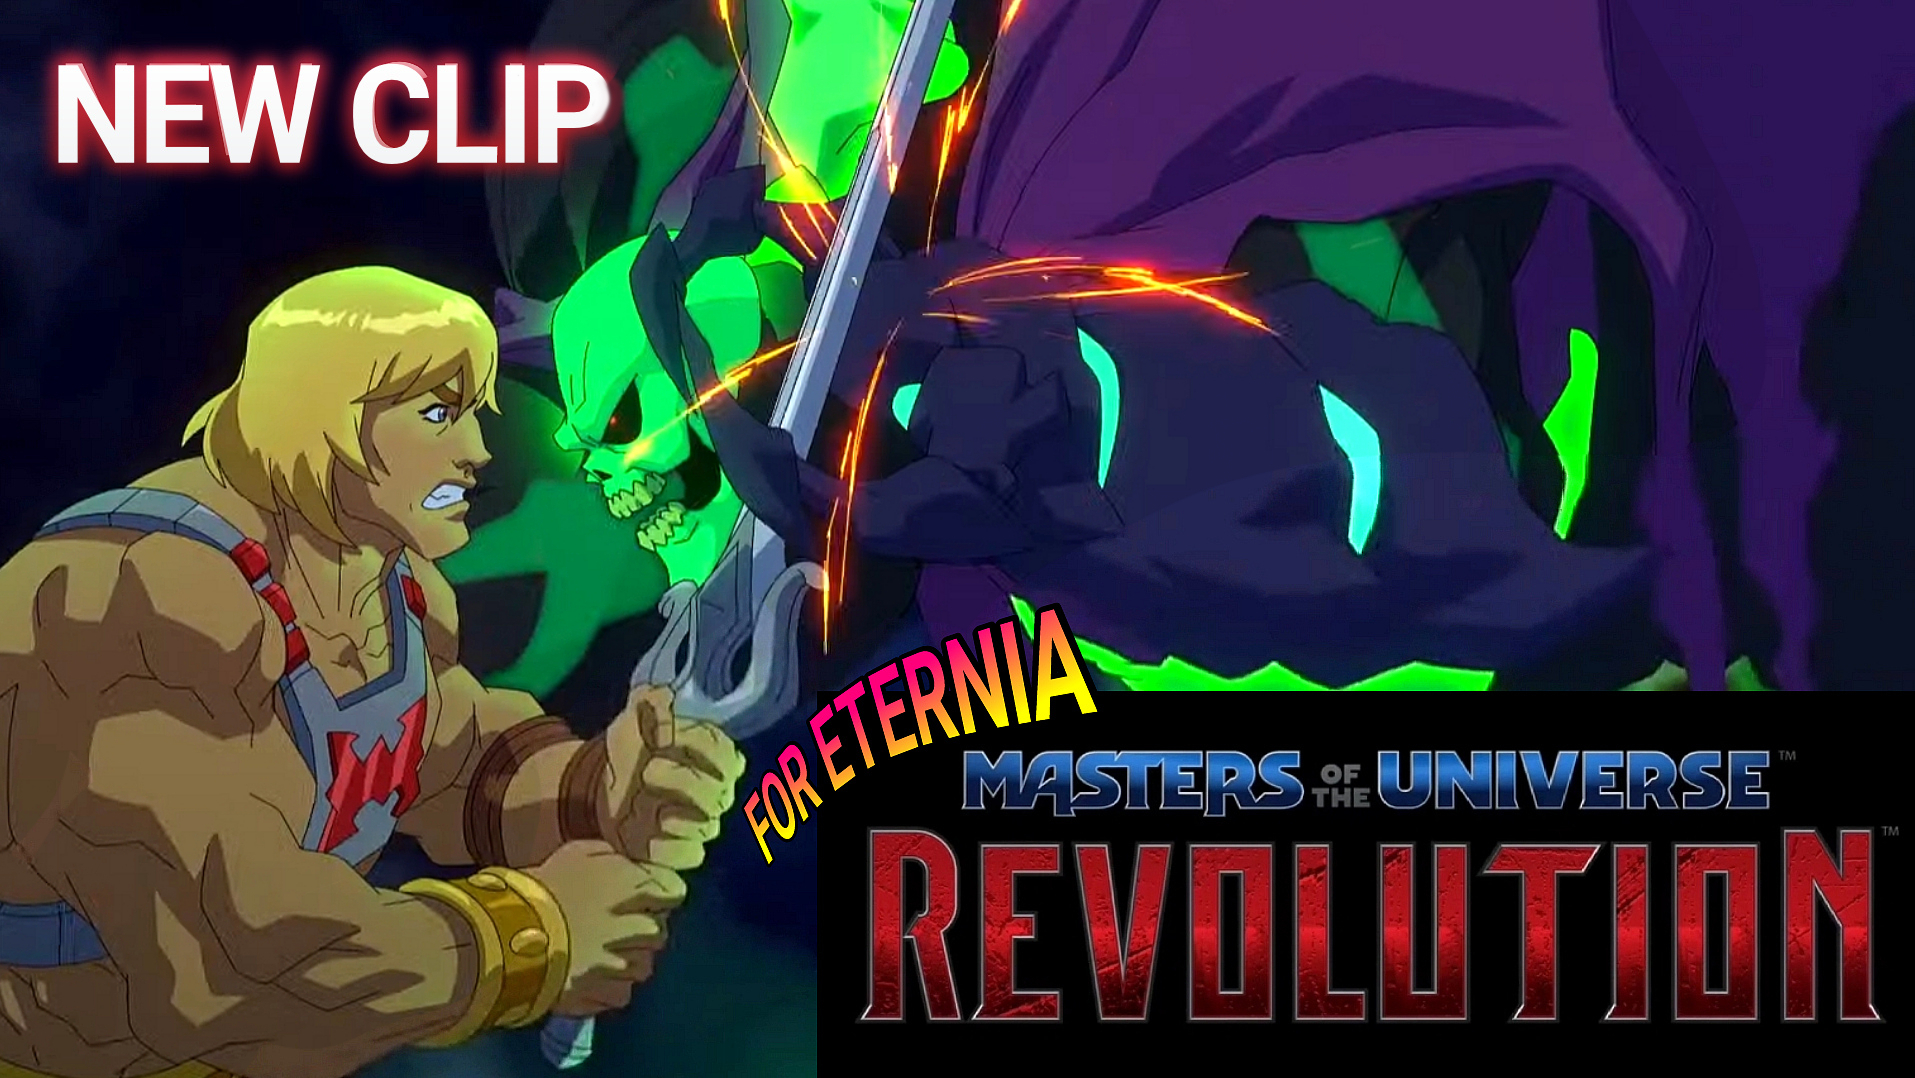 New He-Man Vs Scare Glow ”Masters of the Universe: Revolution” Video Clip Released!